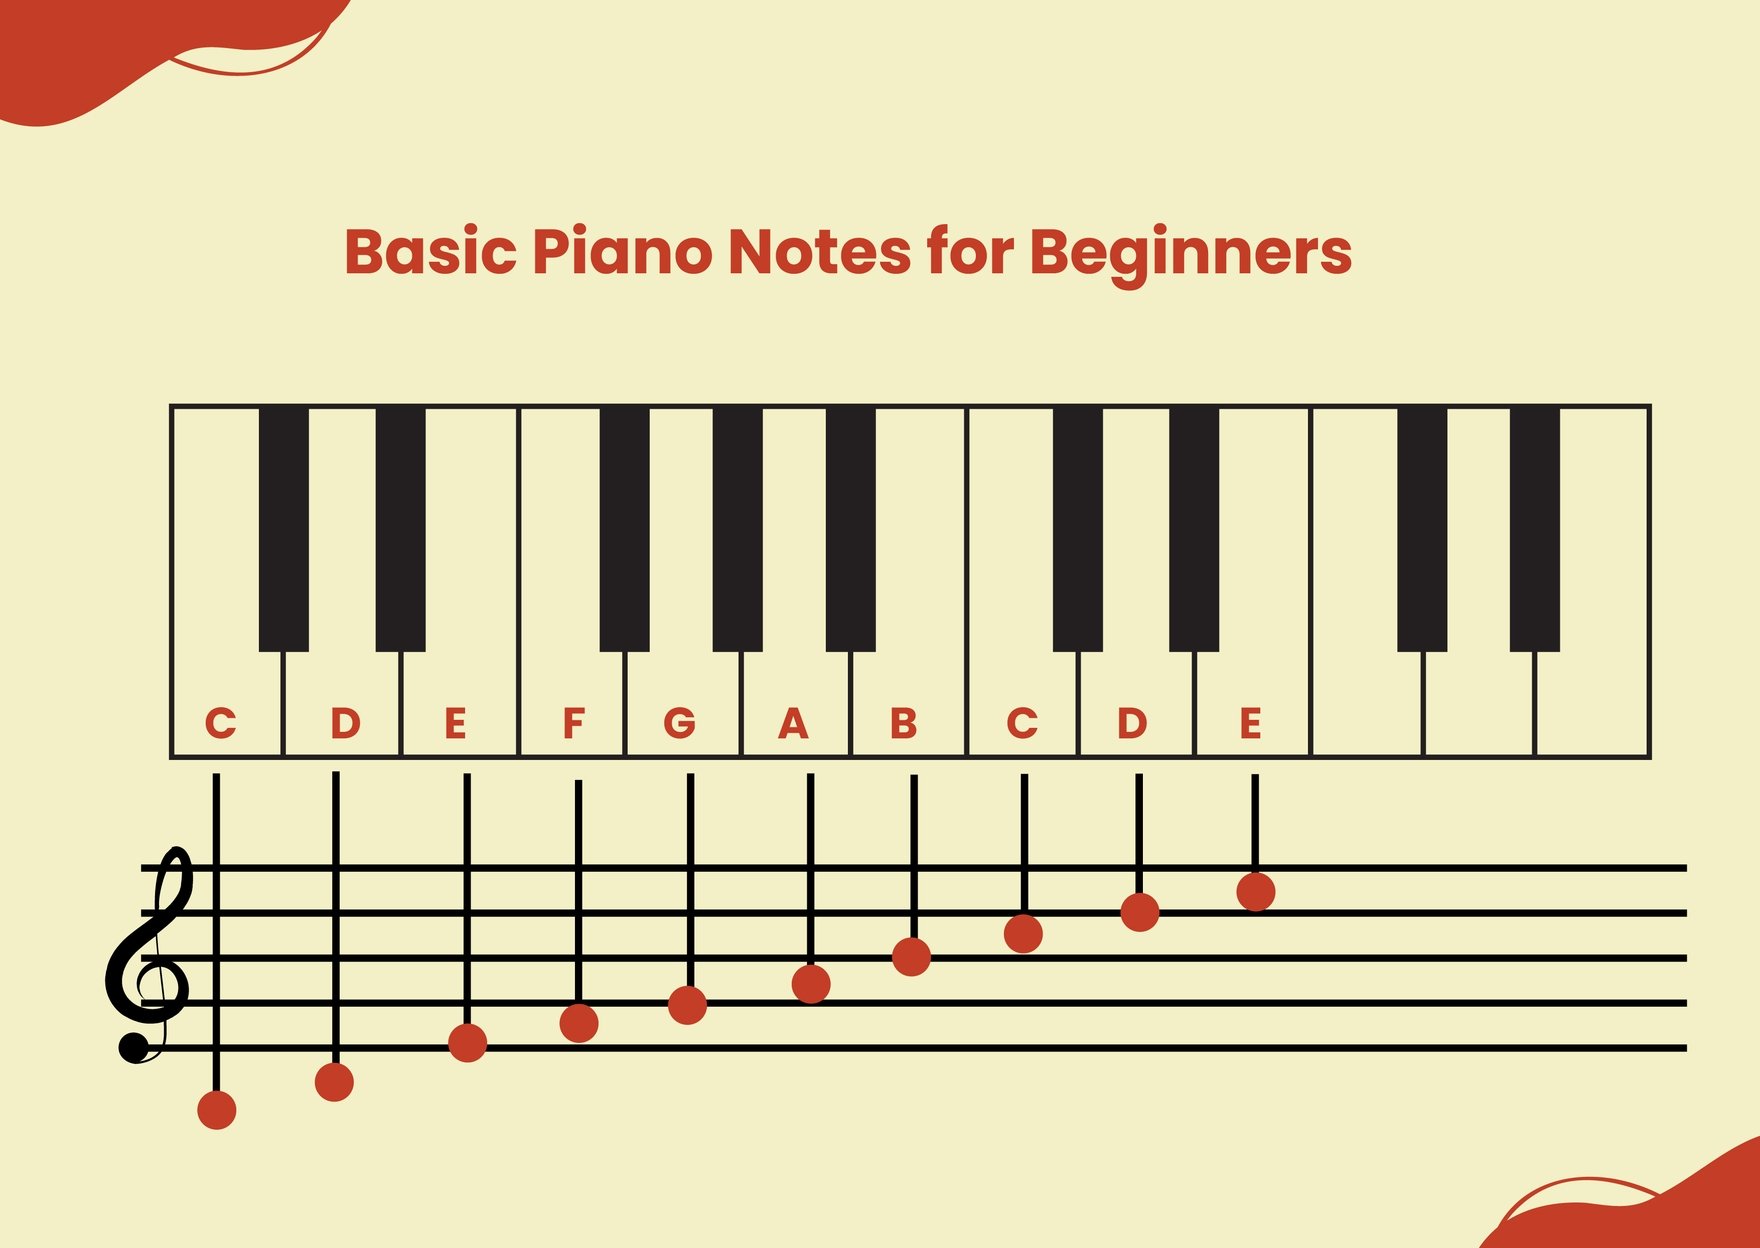 Free Piano Music Note Duration Chart Download in PDF, Illustrator